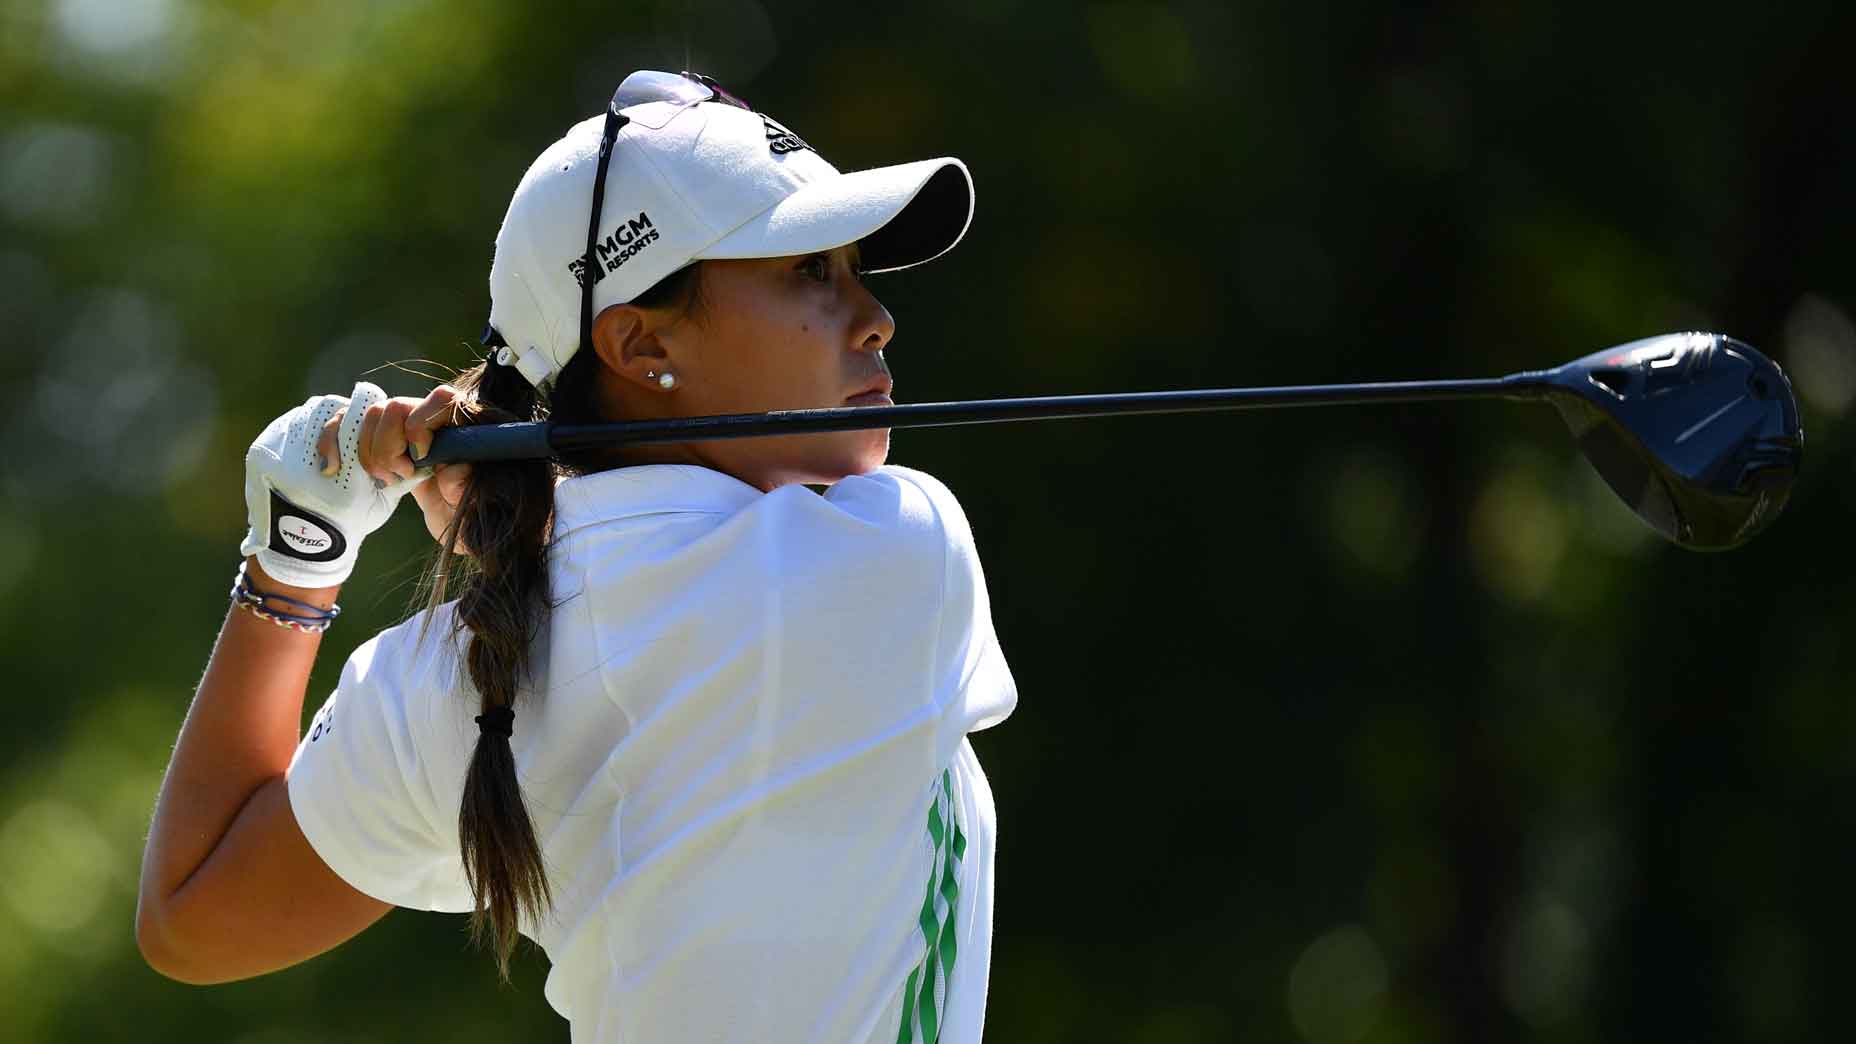 The Butch Harmon fix that helped Danielle Kang beat the driver yips